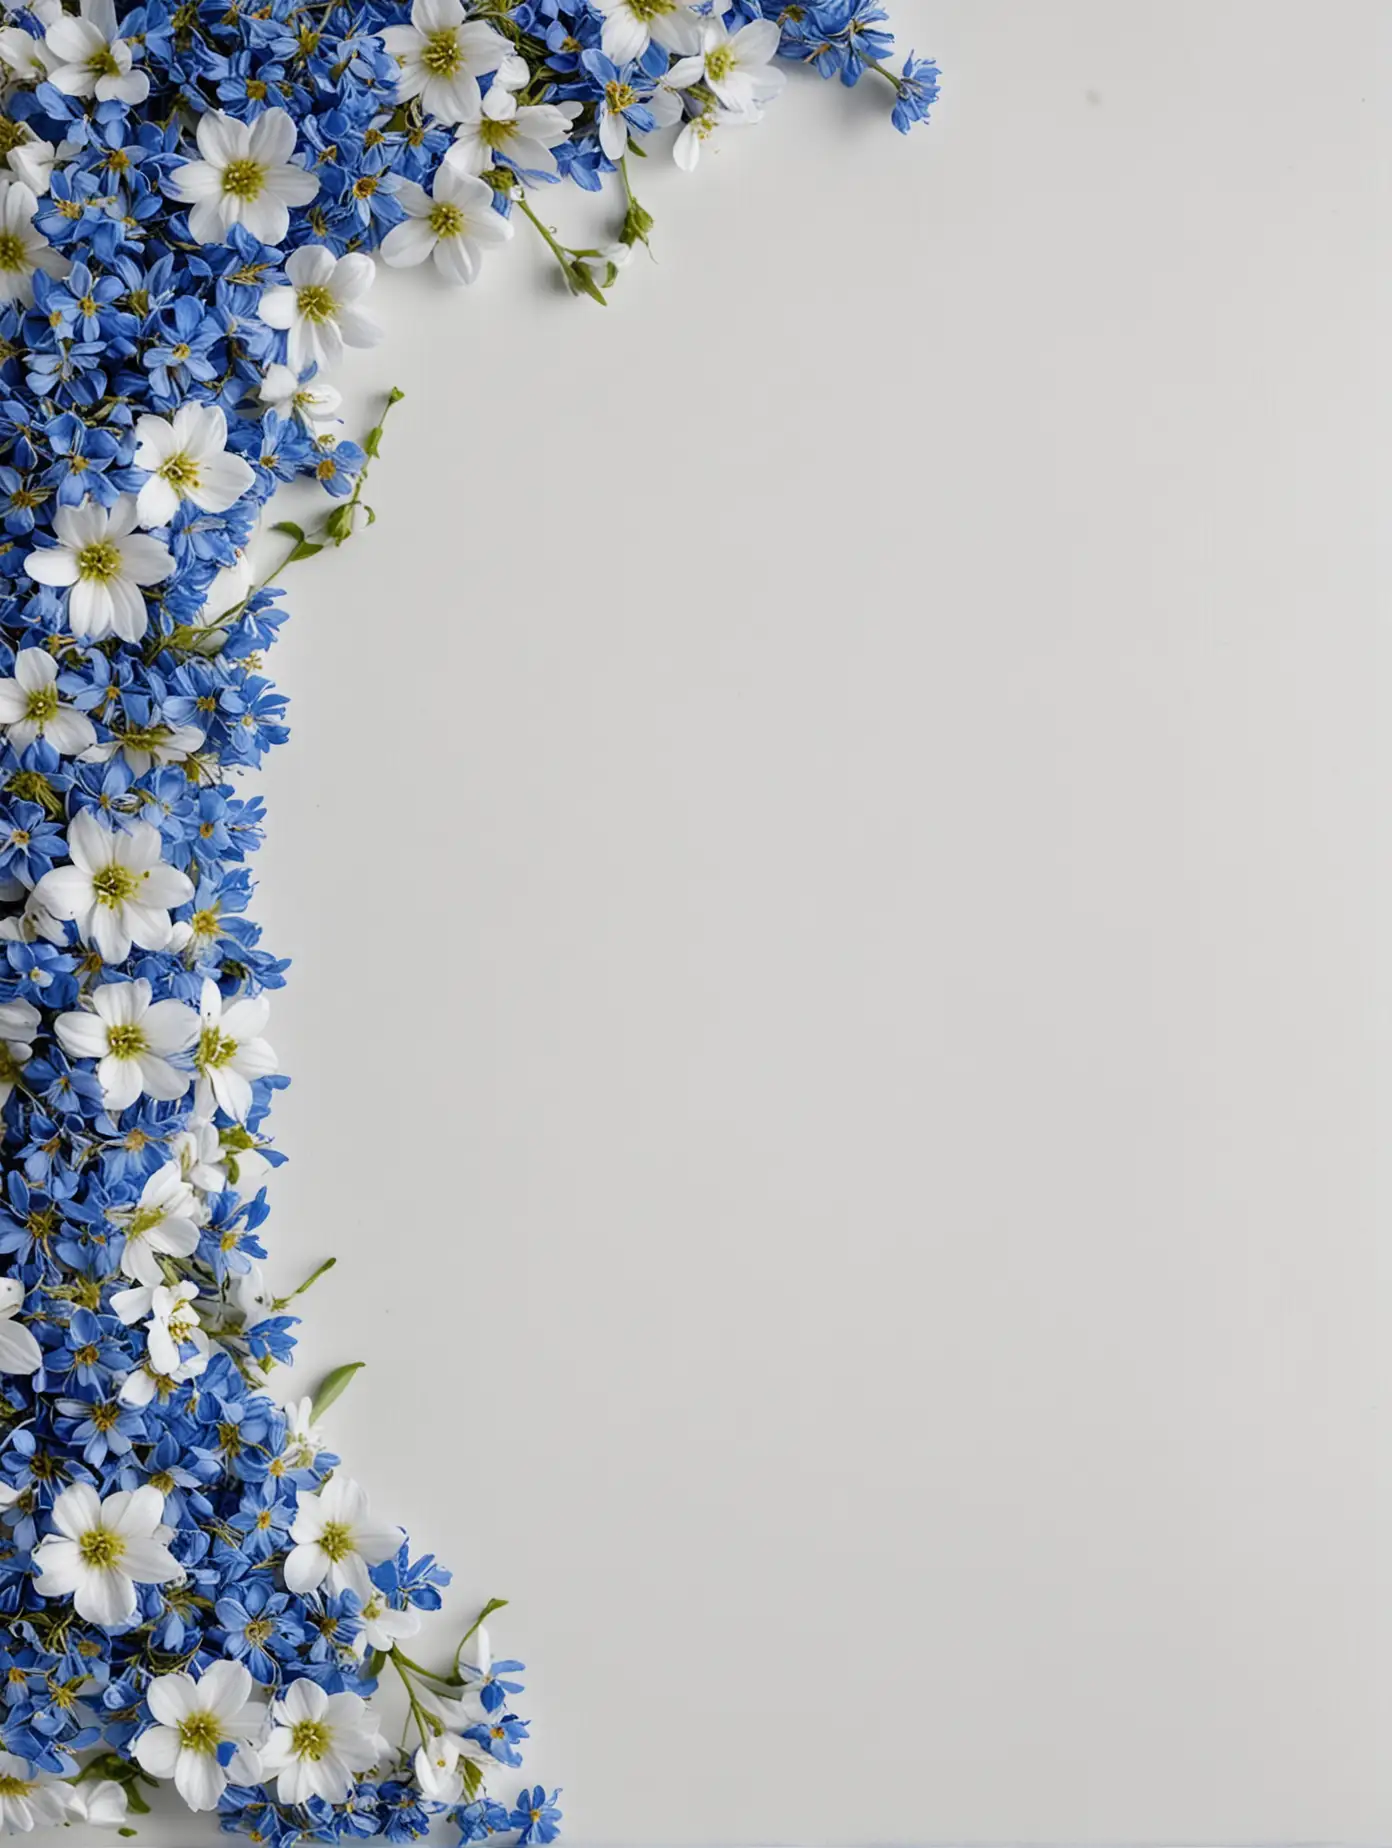 Clean-White-Table-with-Blue-Floral-Accents-in-Macro-HD-View